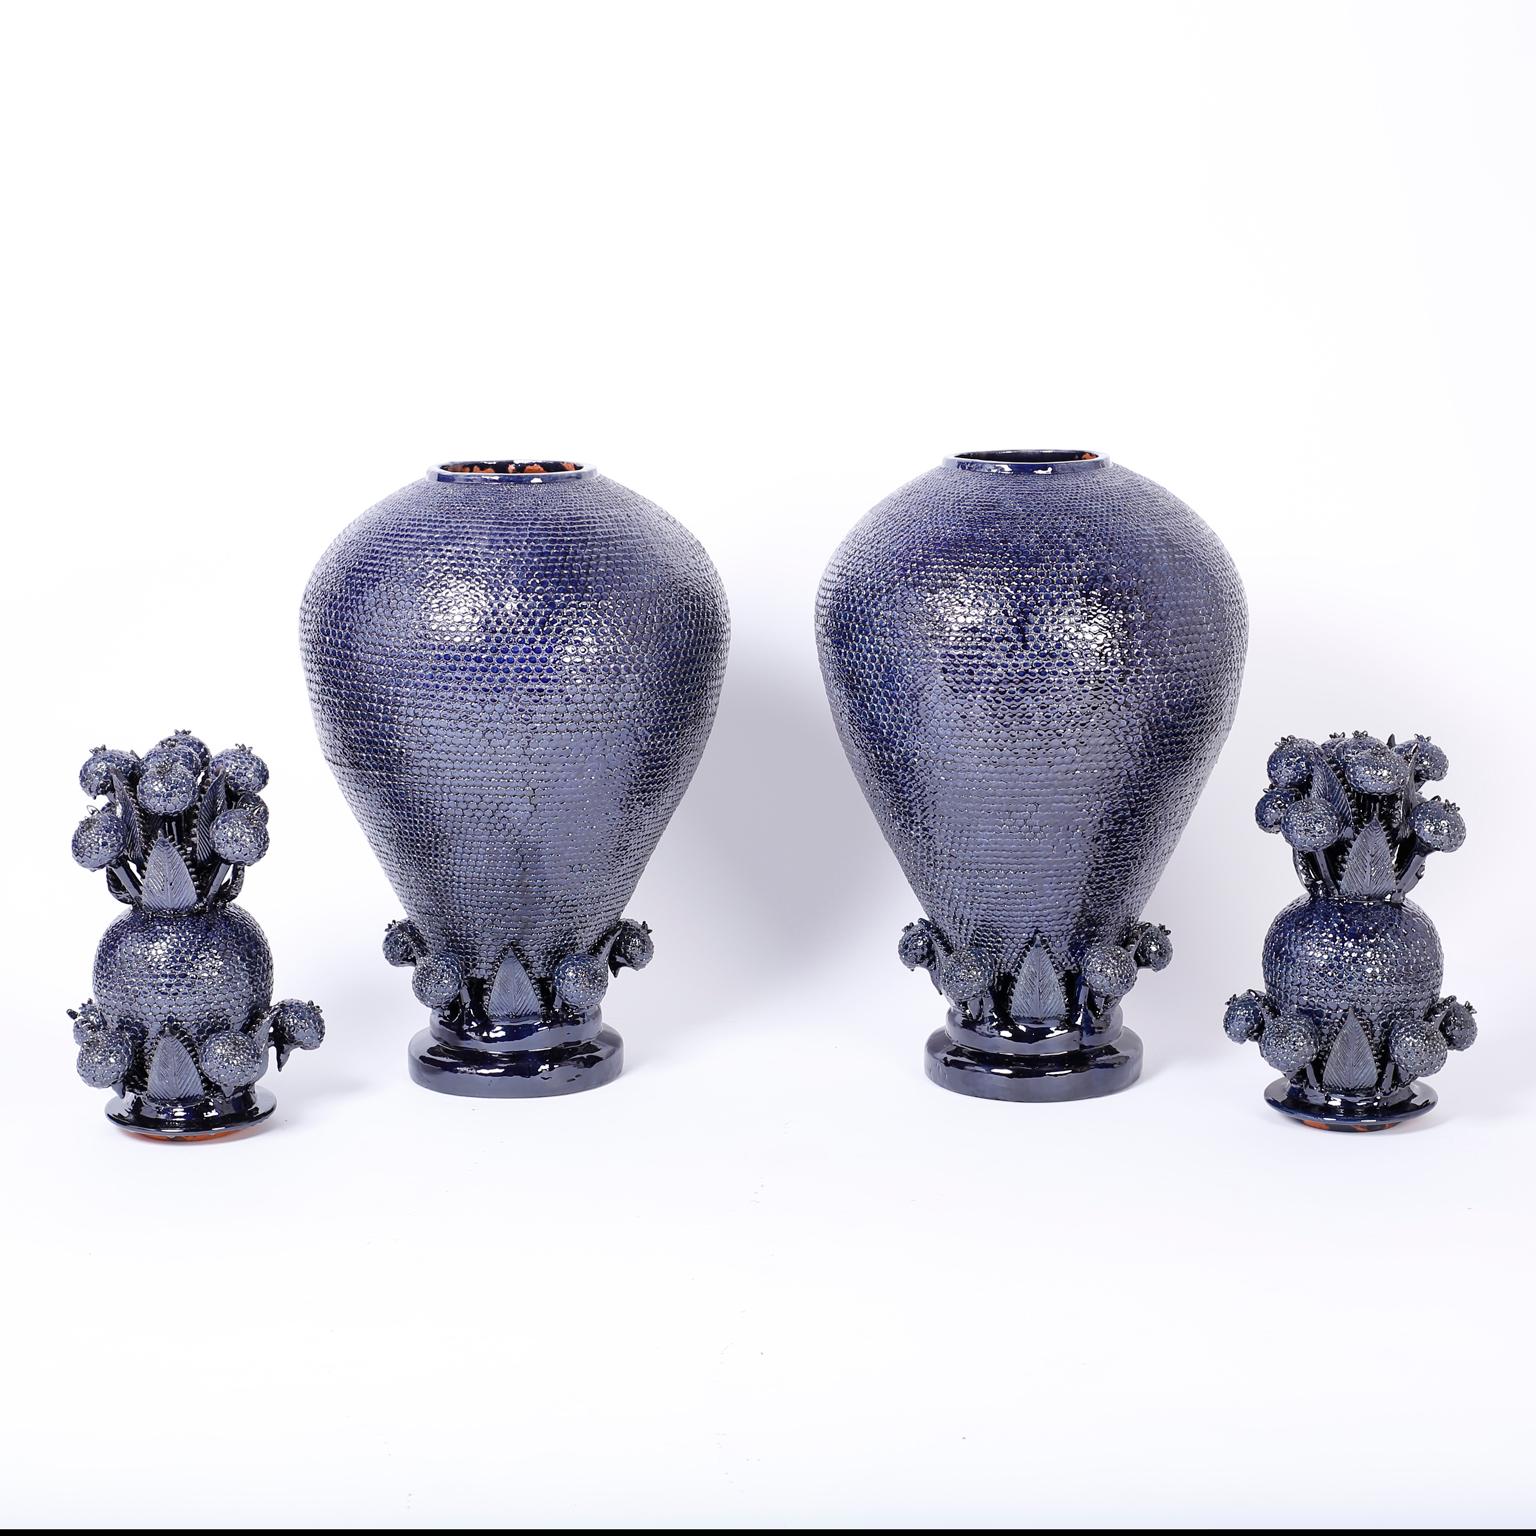 With an extraordinary display of pottery prowess this pair of blue glazed terra cotta urns or jars resembling pineapples take the prize. Featuring dramatic floral lids over a bulbous jar ambitiously decorated in a fish scale motif.